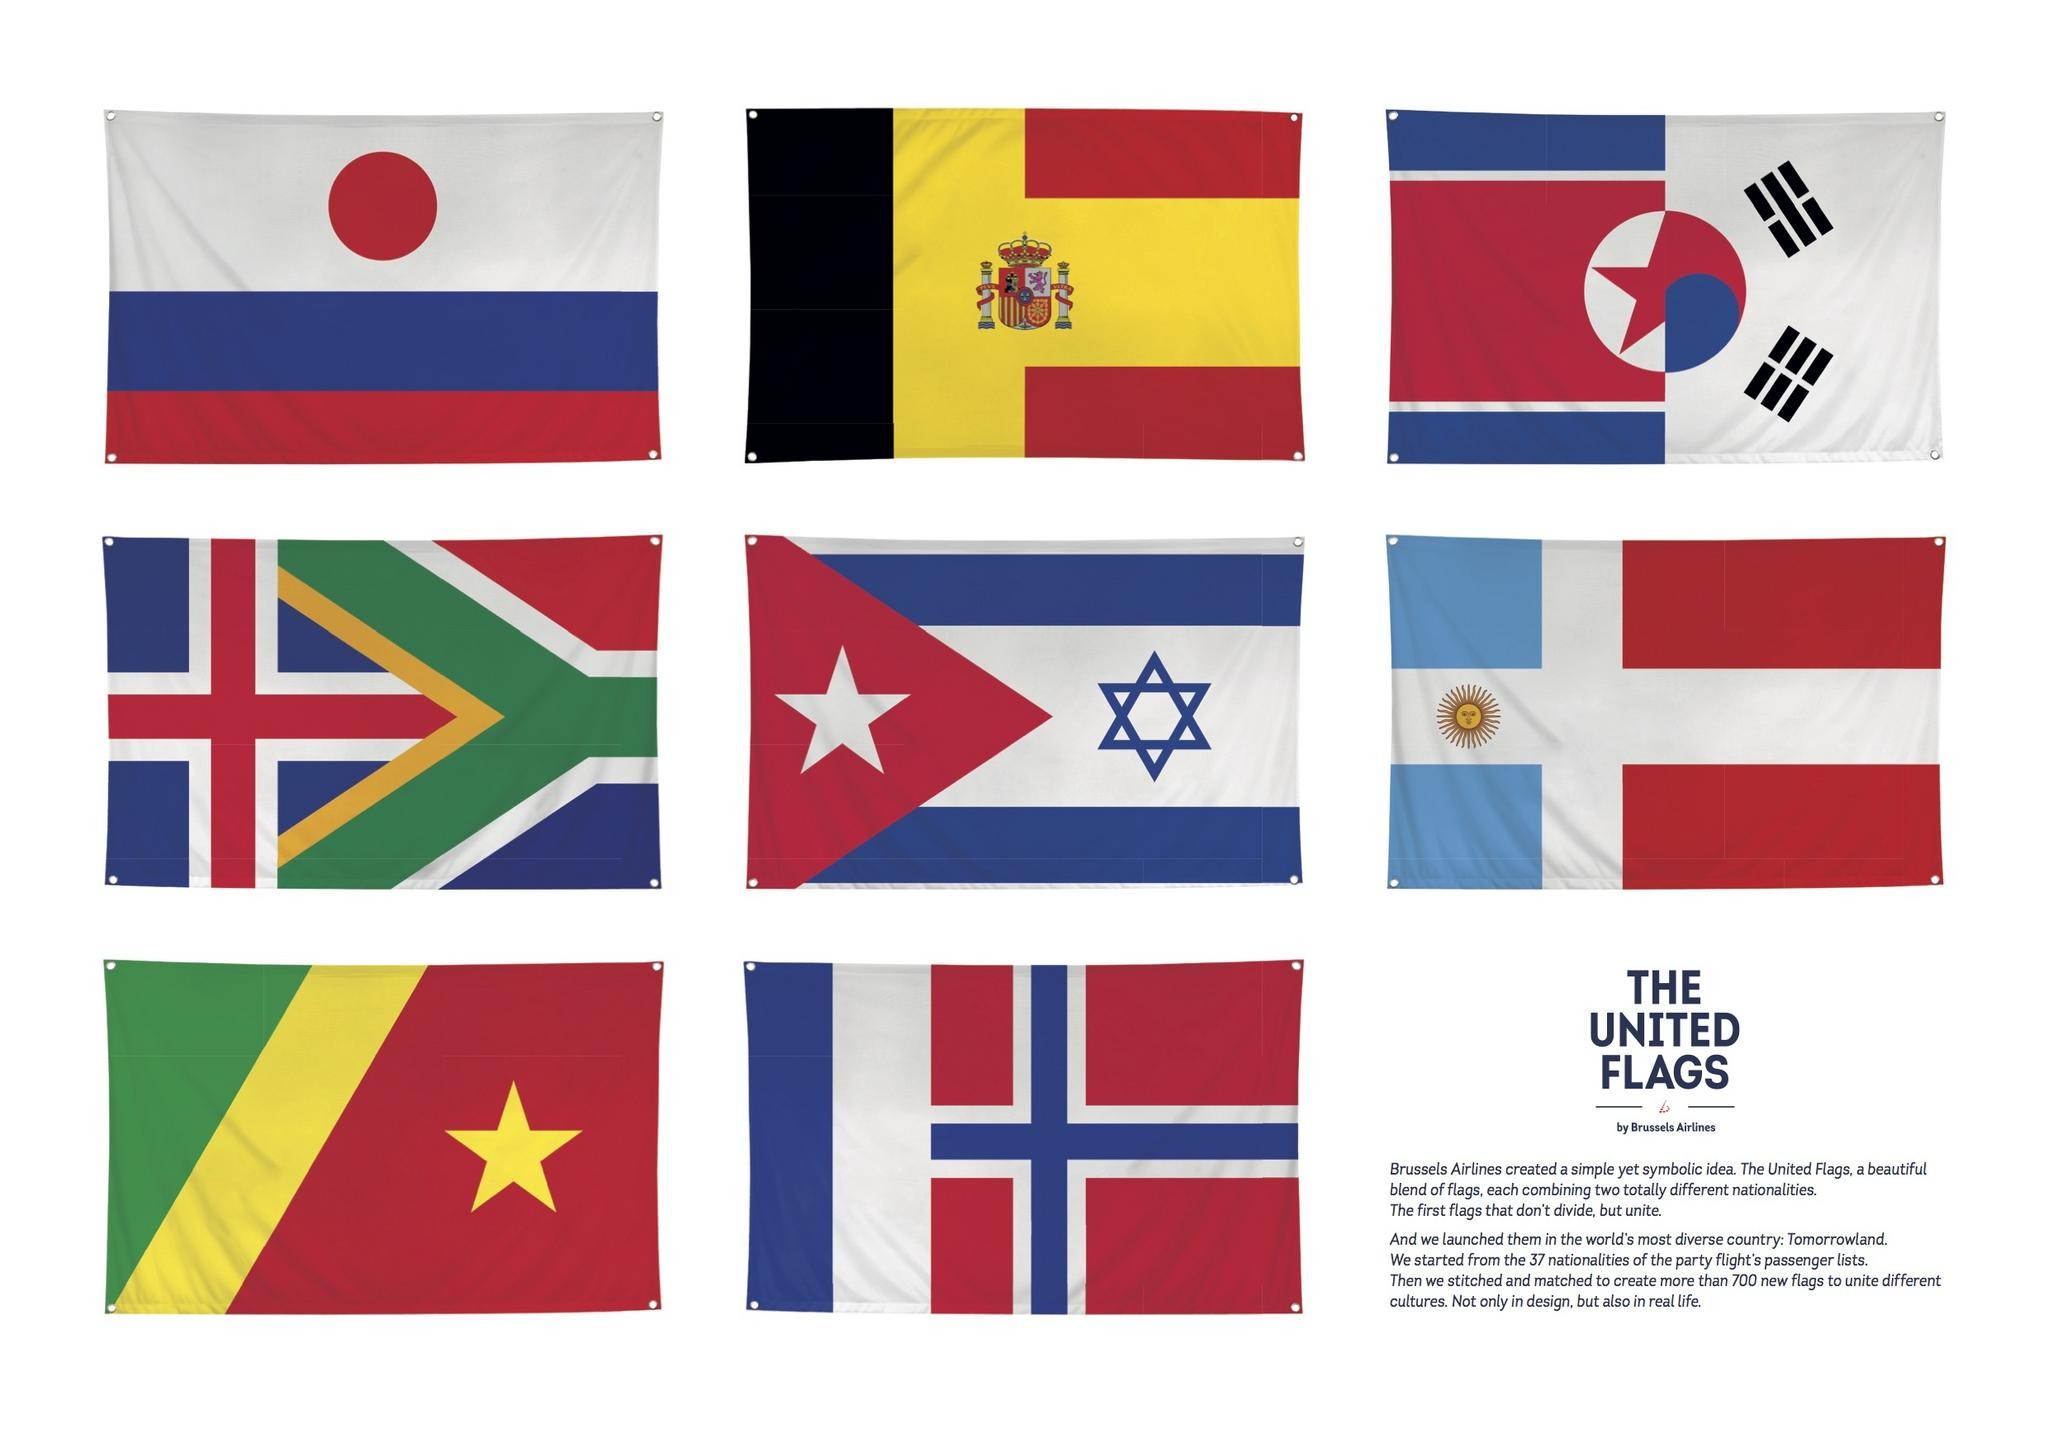 The United Flags